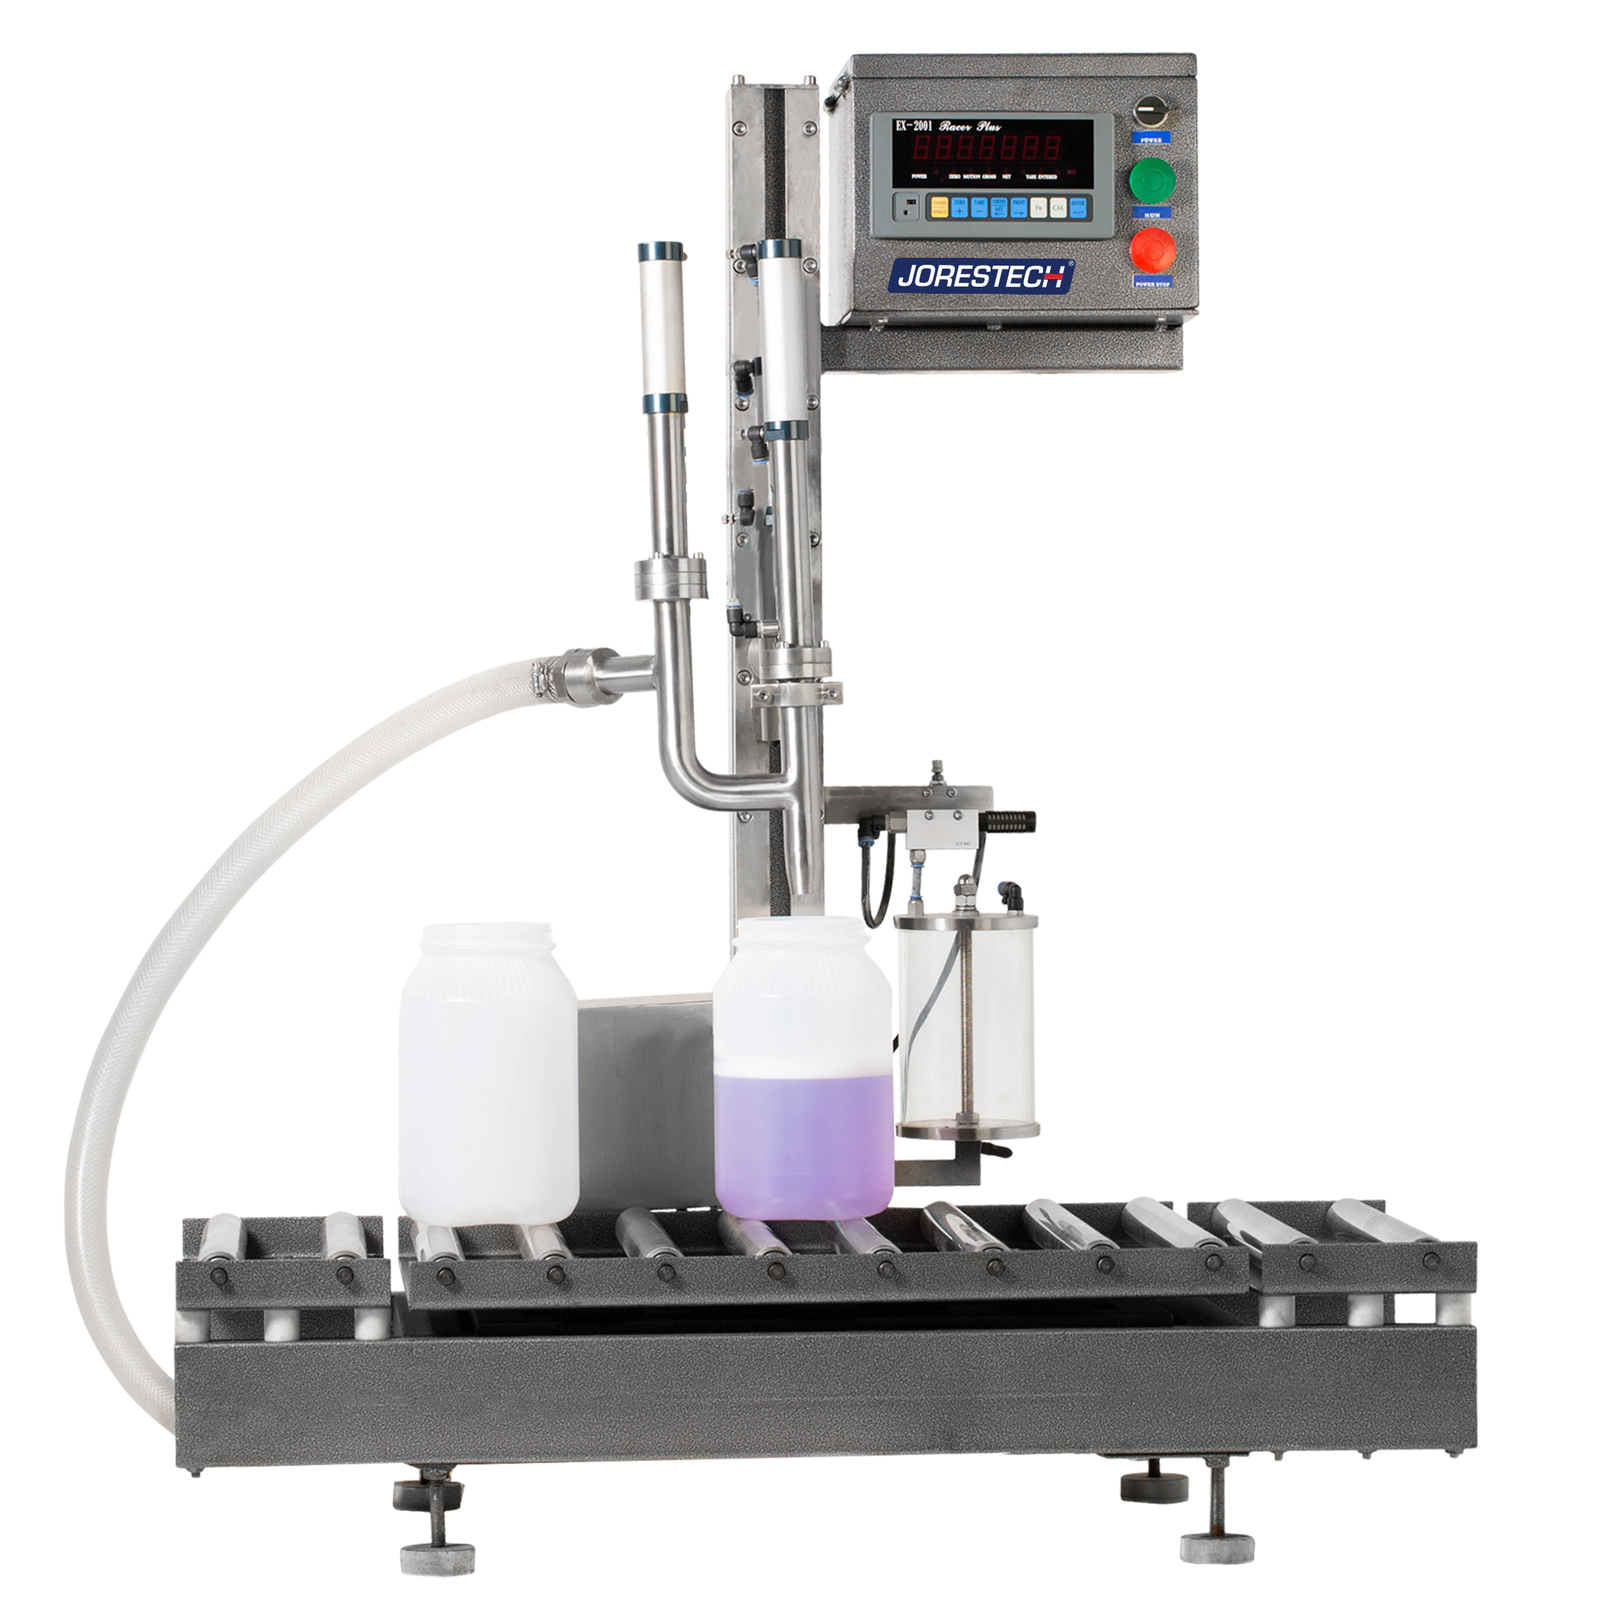 JORES TECHNOLOGIES® net weight liquid filler with integrated roller conveyor. There are two large containers on the conveyor, one of them is positioned below the dispensing nozzle and is being filled with a purple liquid solution.